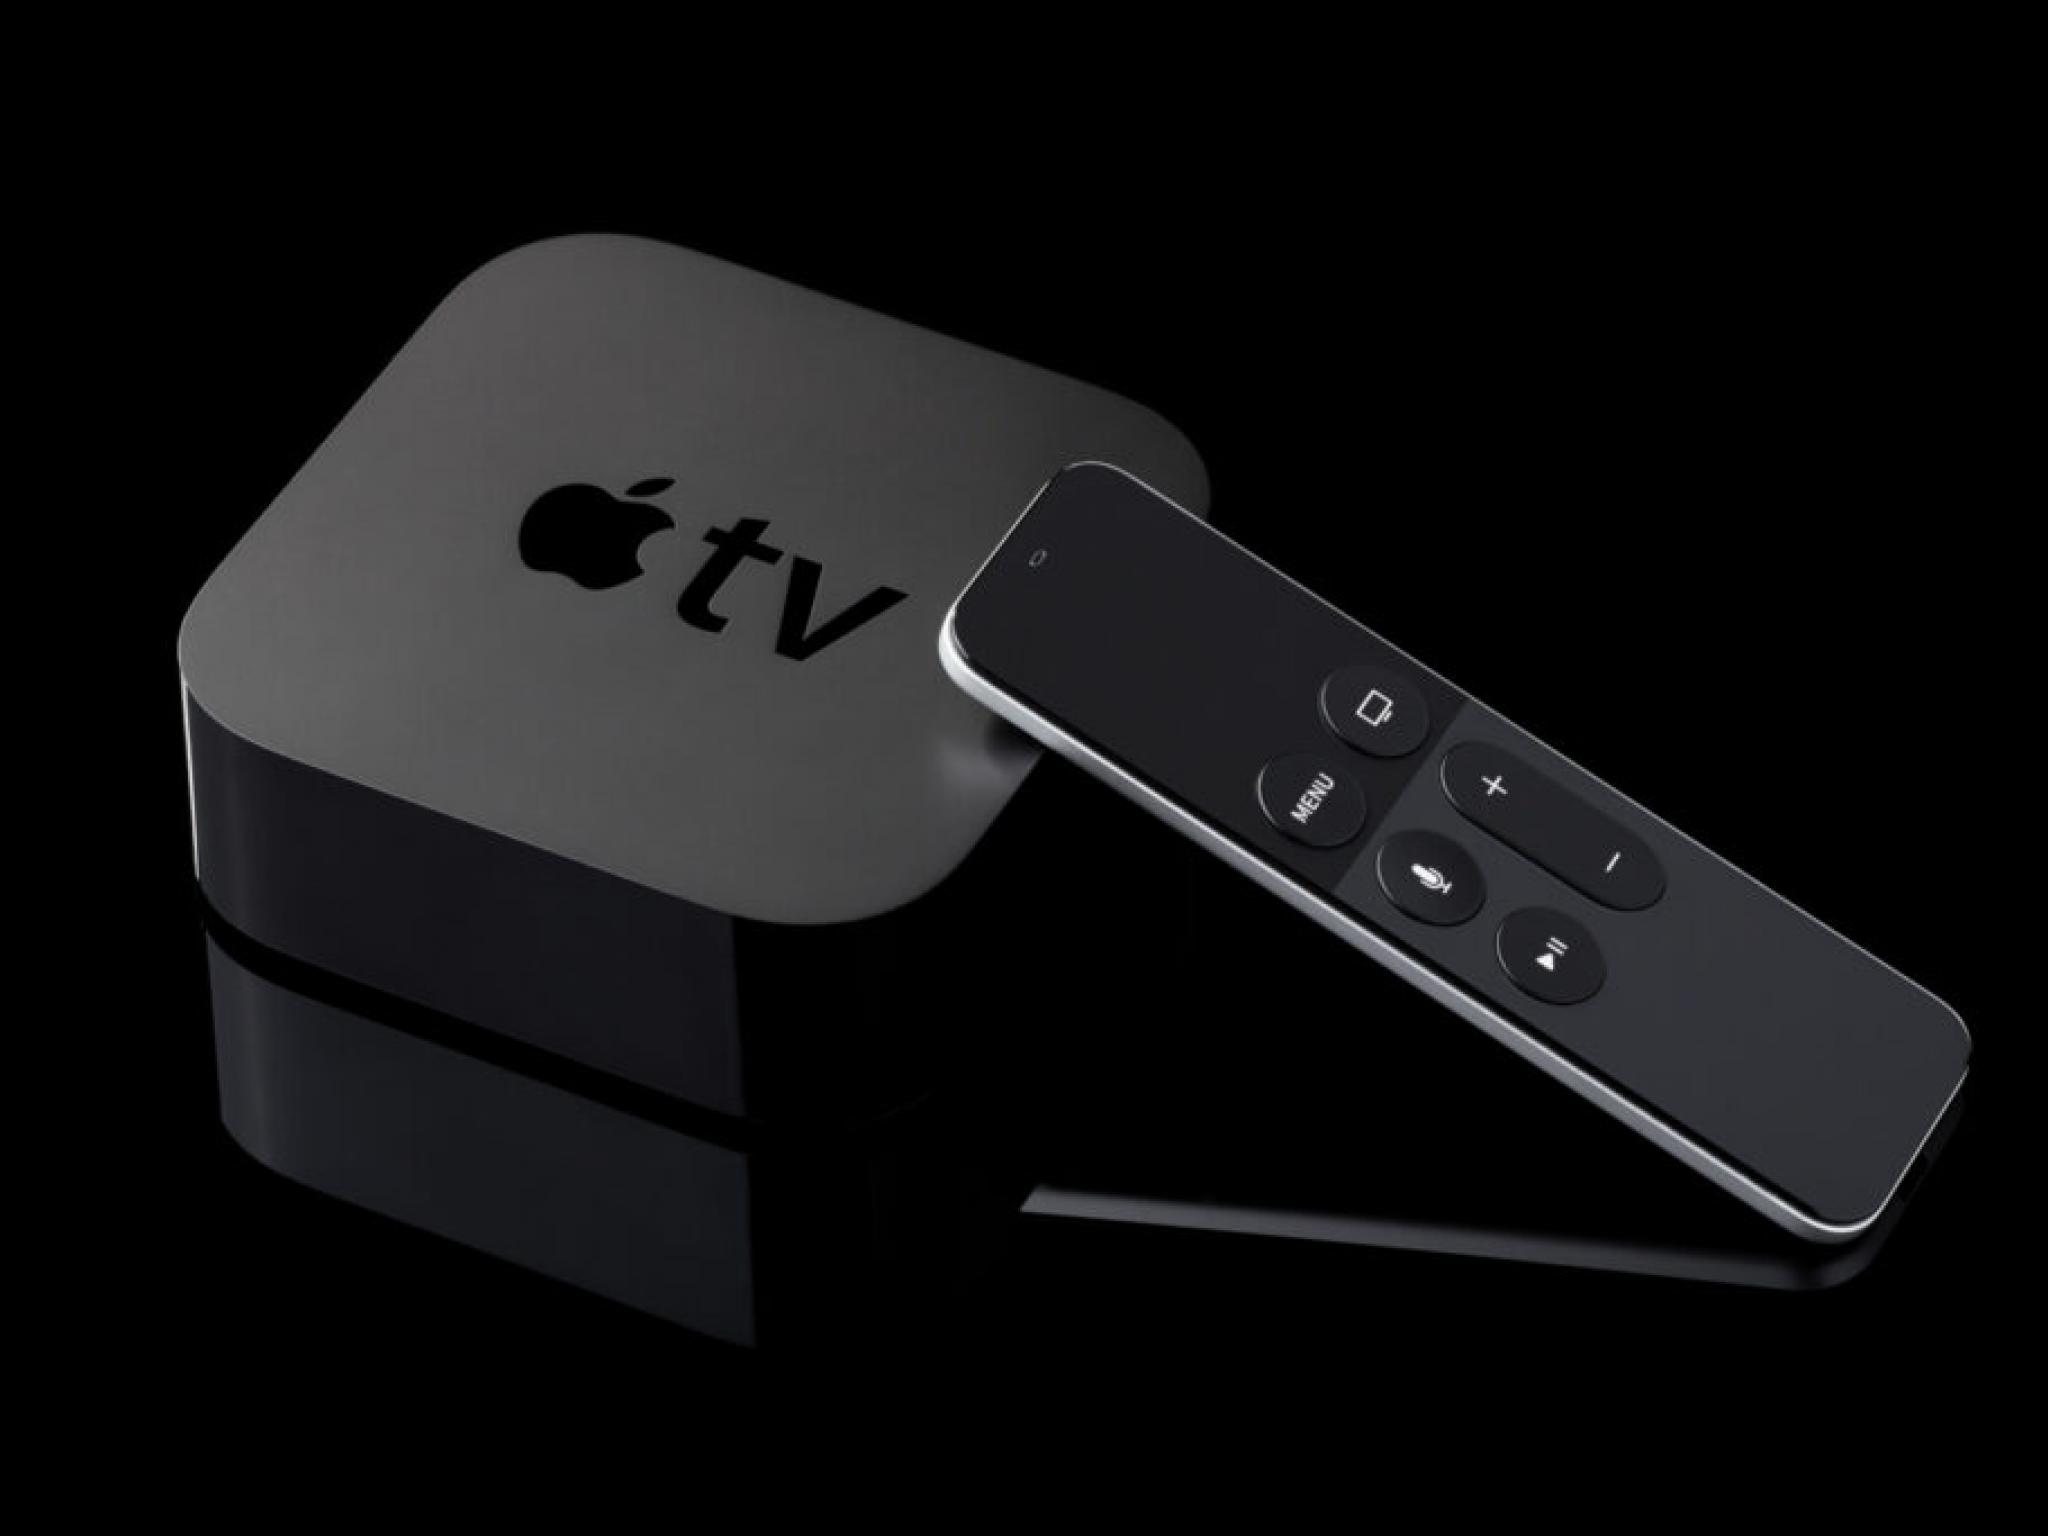  apple-to-follow-netflix-disney-ad-supported-appletv-streaming-plan-could-launch-soon 